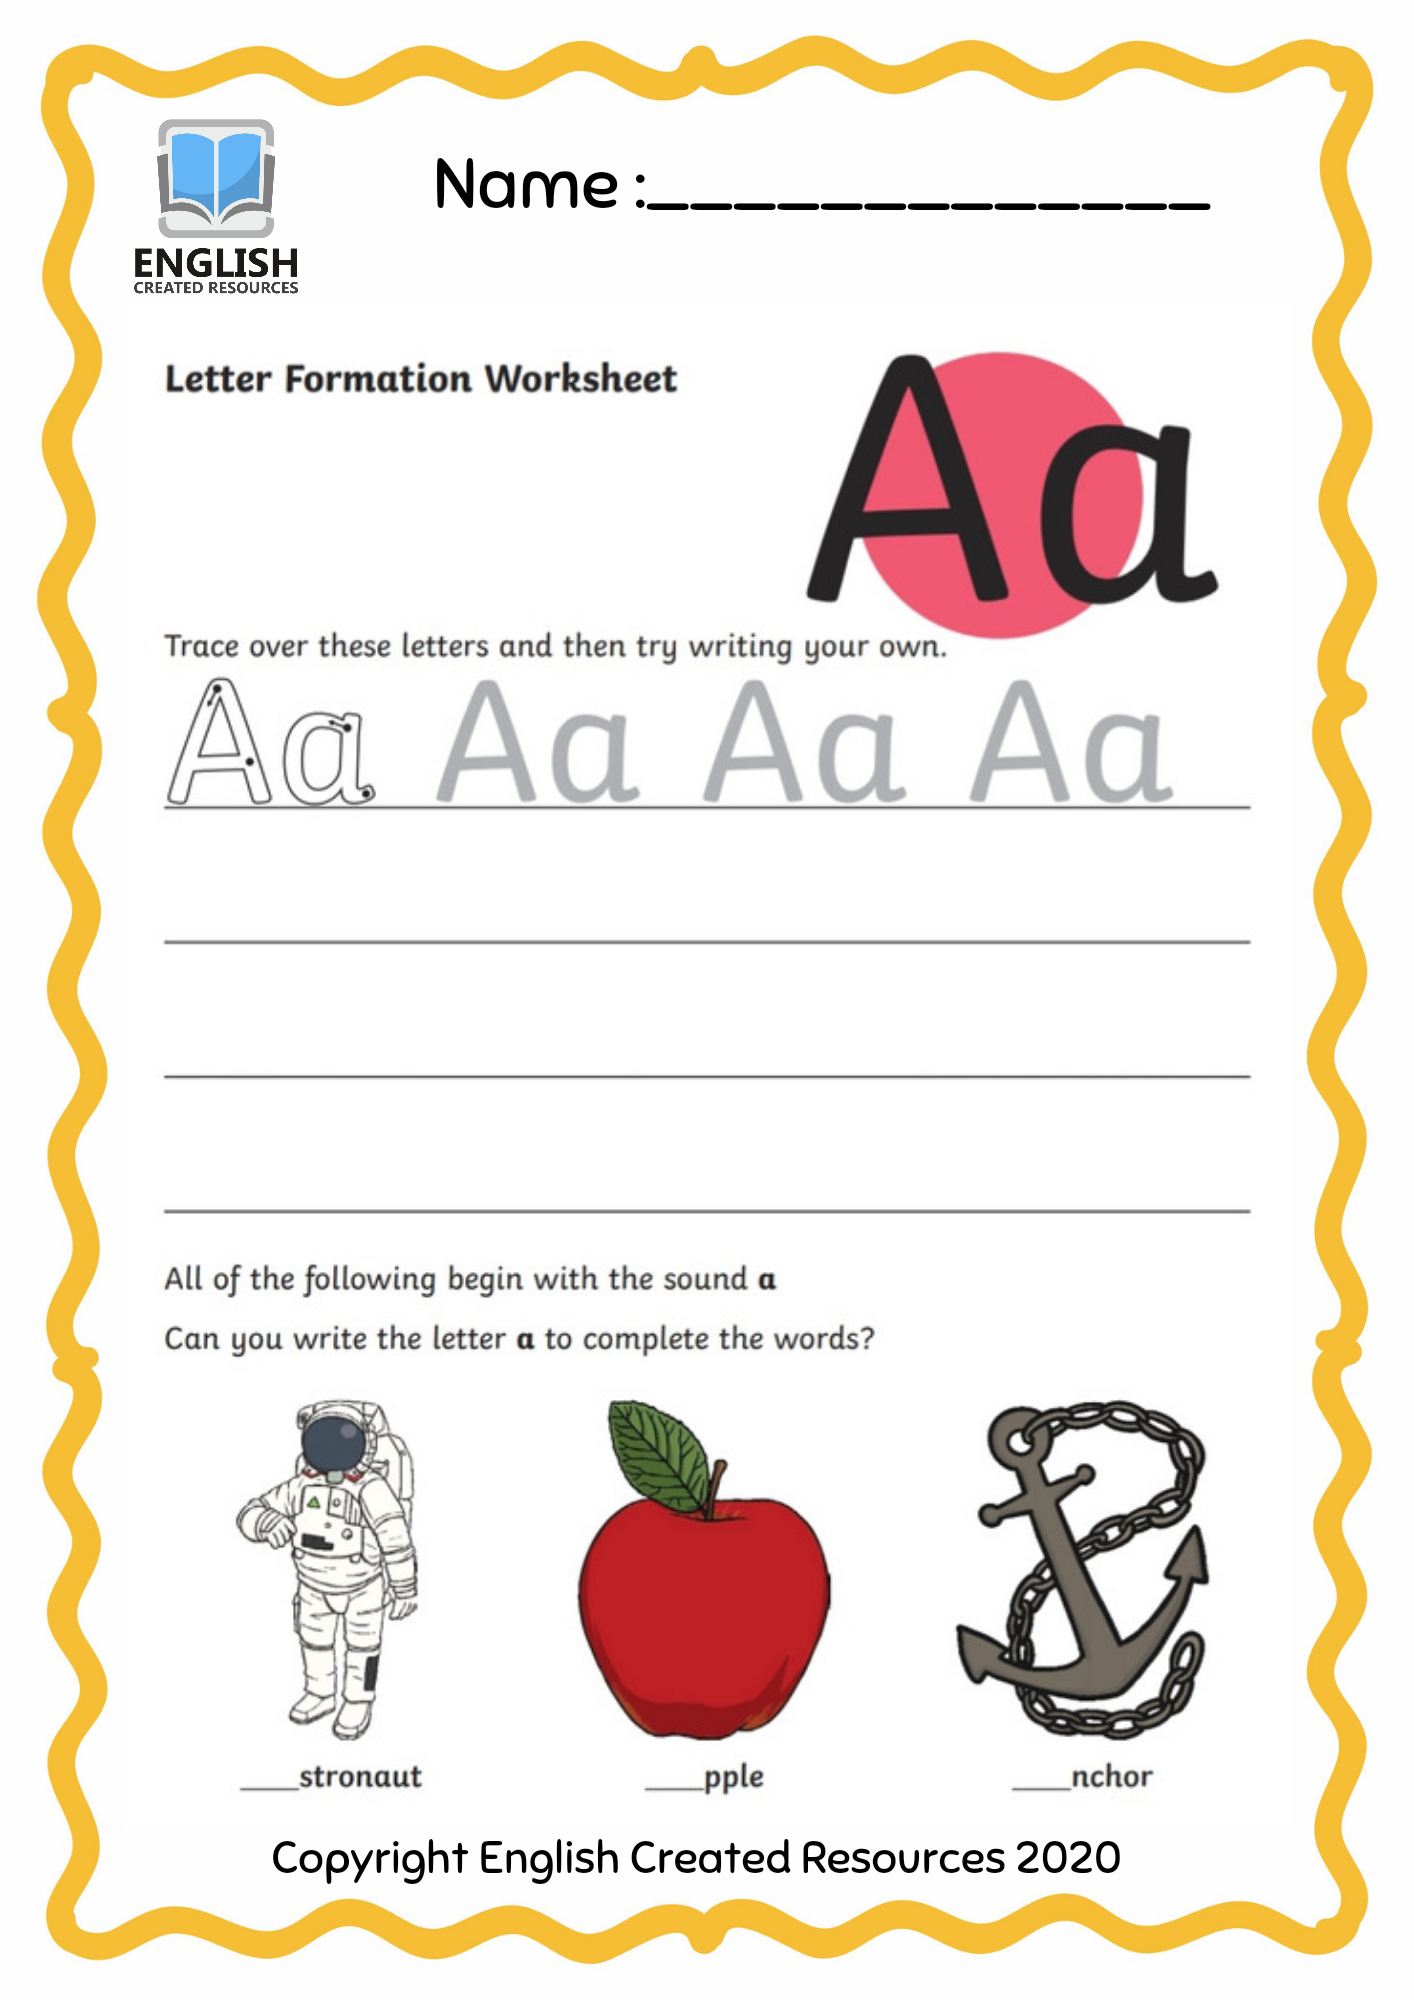 letter-formation-worksheets-english-created-resources